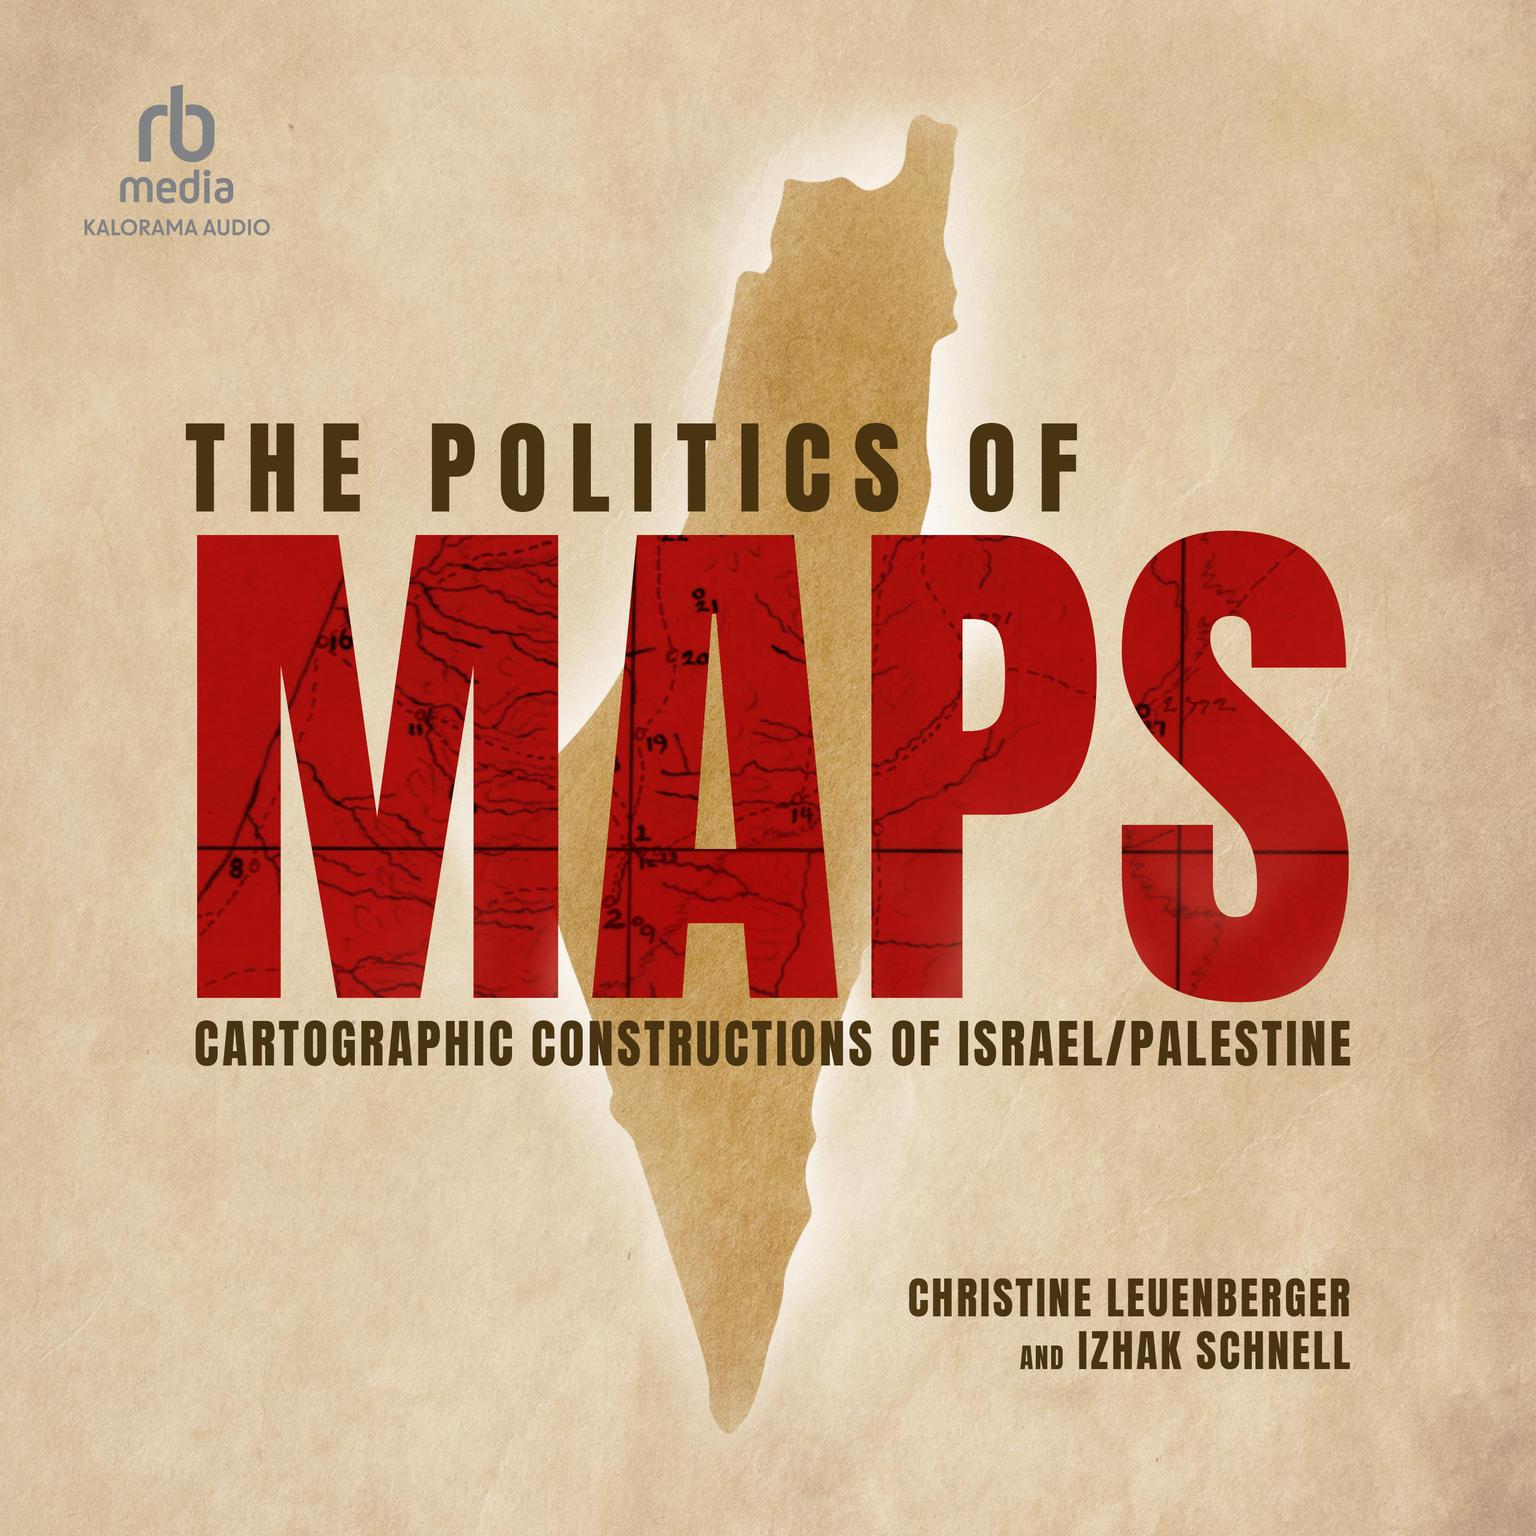 The Politics of Maps: Cartographic Constructions of Israel/Palestine Audiobook, by Christine Leuenberger